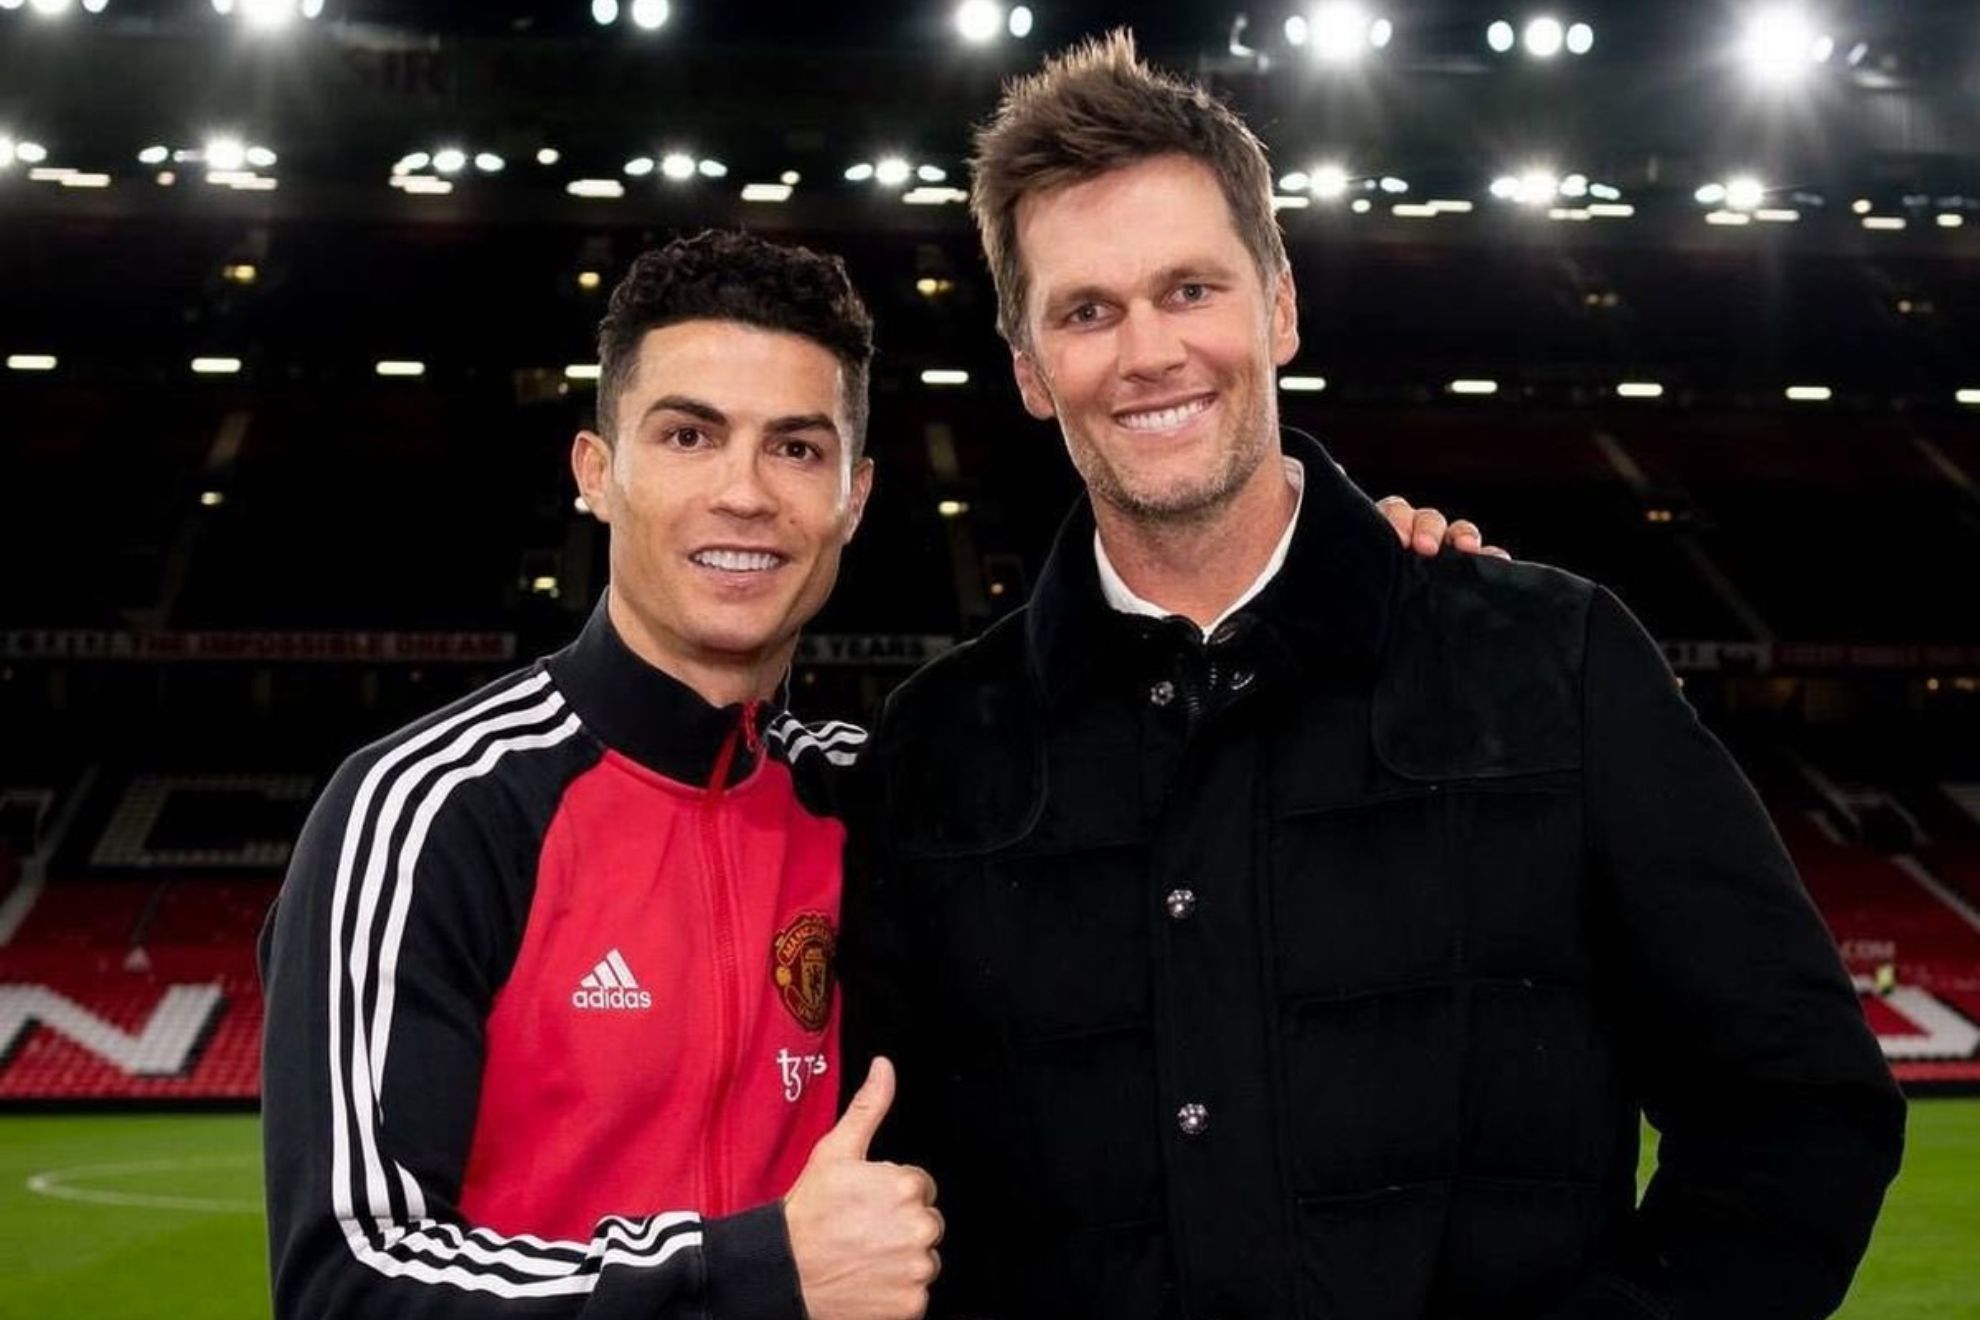 Cristiano Ronaldo and Tom Brady meeting after Manchester United-Tottenham at Old Trafford on March 12th.